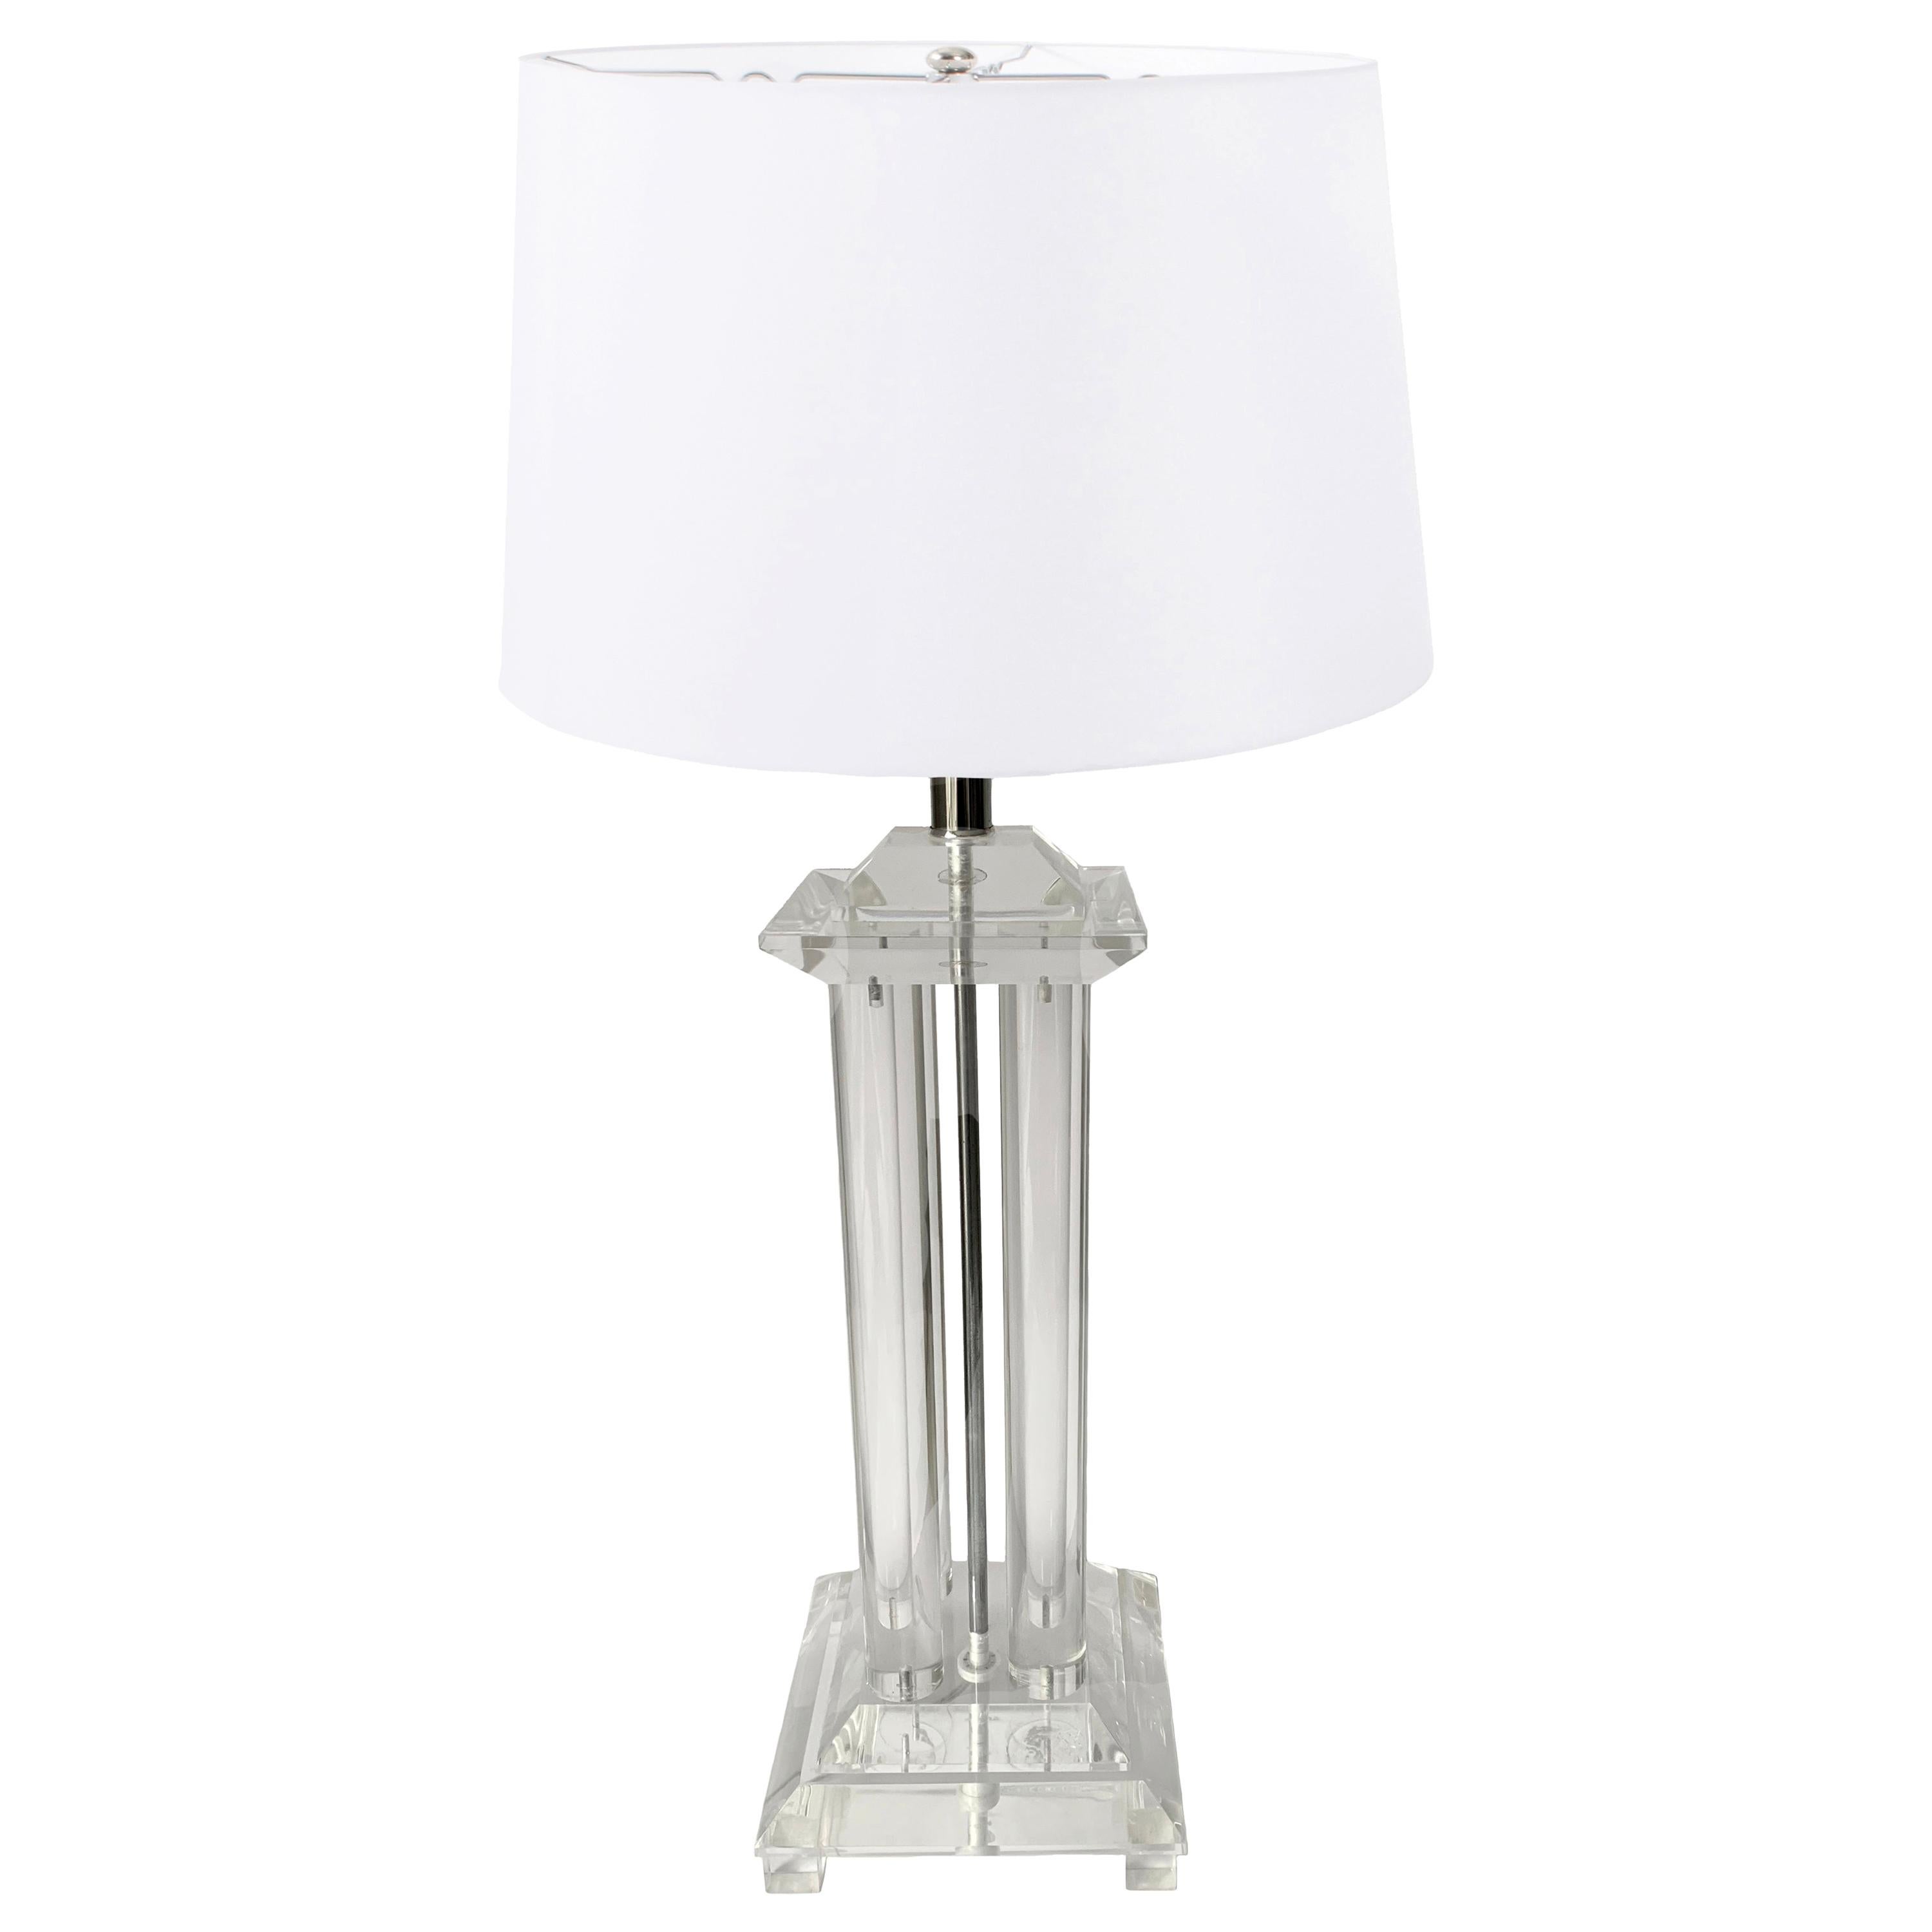 Large Lucite Column Table Lamp